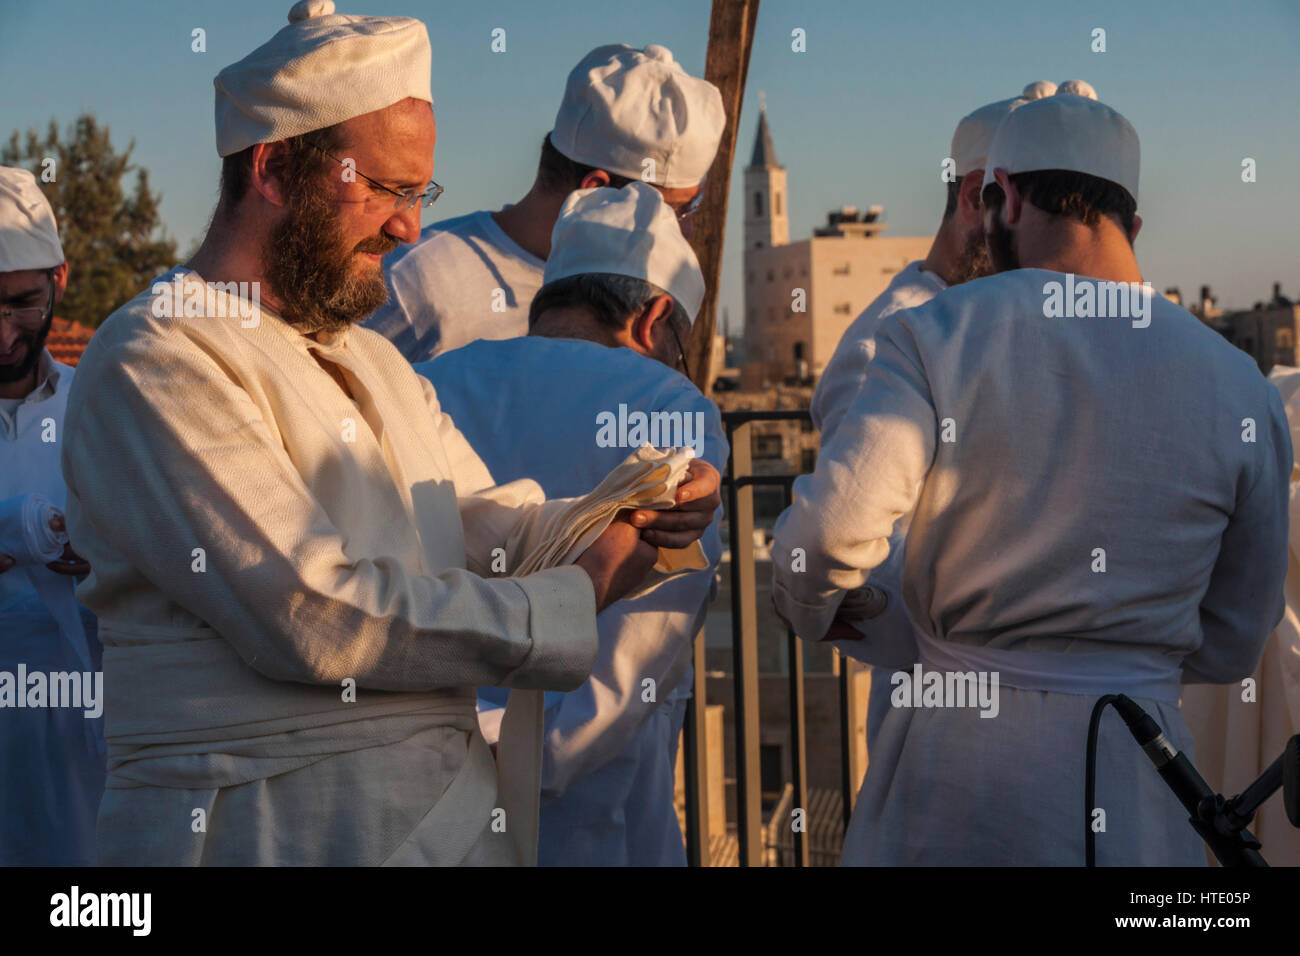 Jerusalem, Israel. Cohanim (Jewish members of the Levi tribe, responsible for keeping religious rites) during a simulation of the Passover sacrifice. Stock Photo